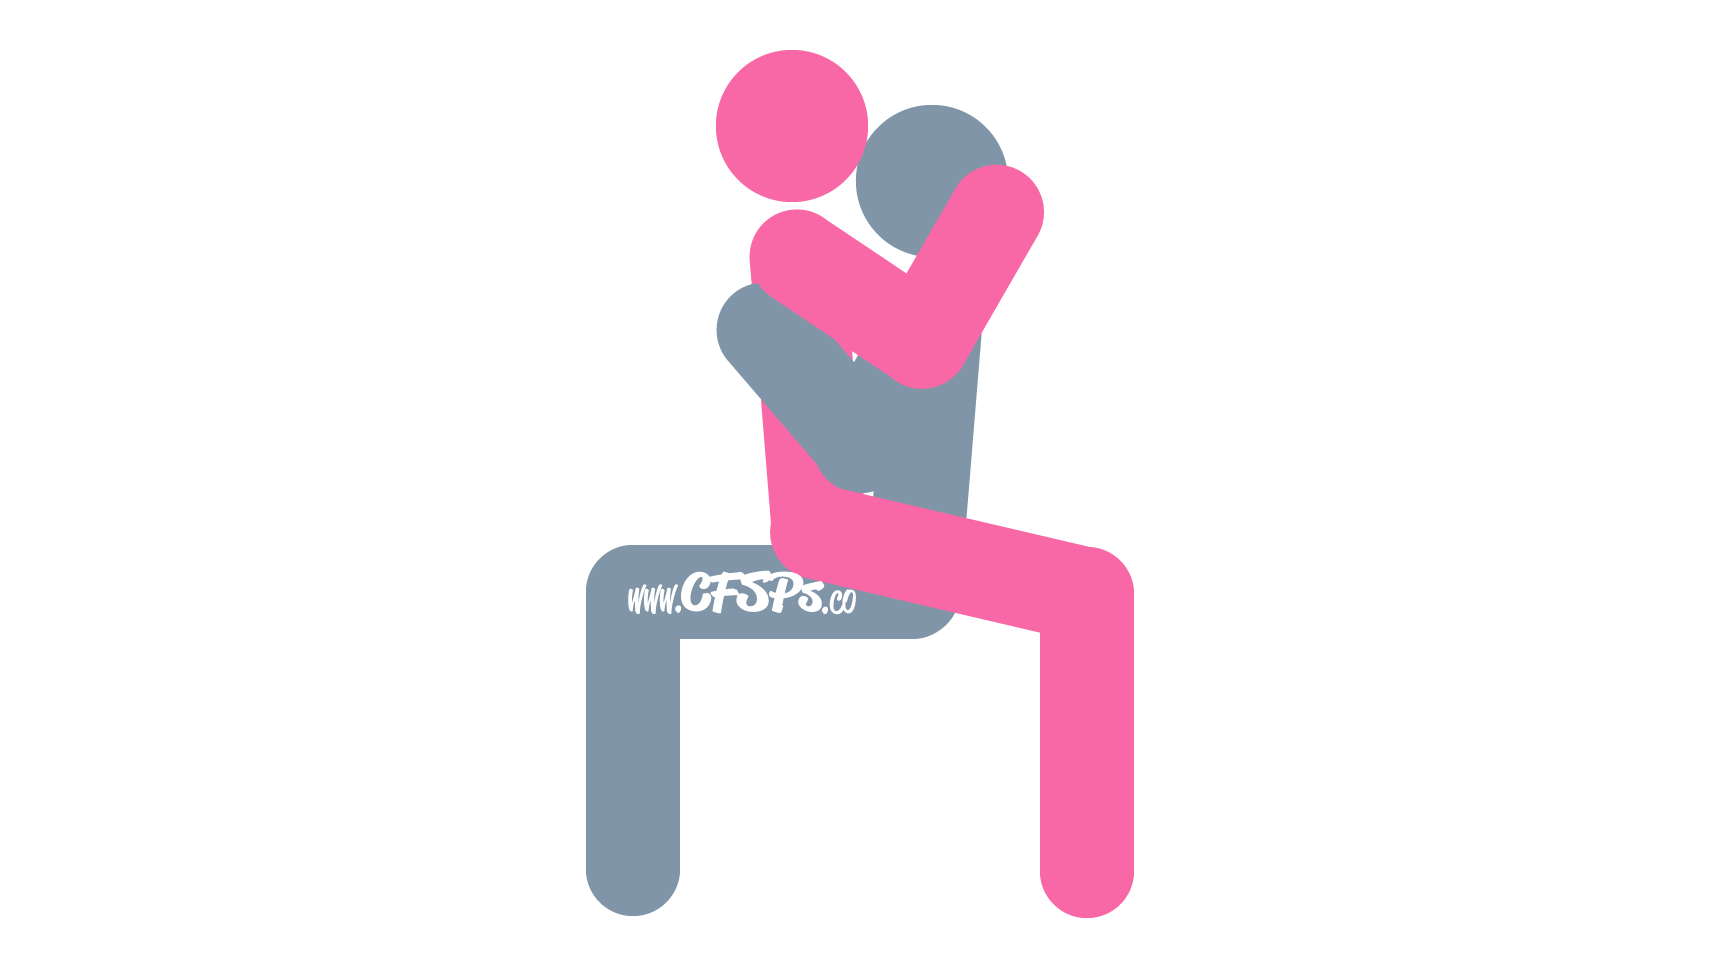 This stick figure image depicts a man and woman having sex in the Amazon sex position. The man is sitting in an armless chair. The woman is straddling his pelvis with her feet on the floor behind him. Her breasts are near his face, and her arms are around his neck.